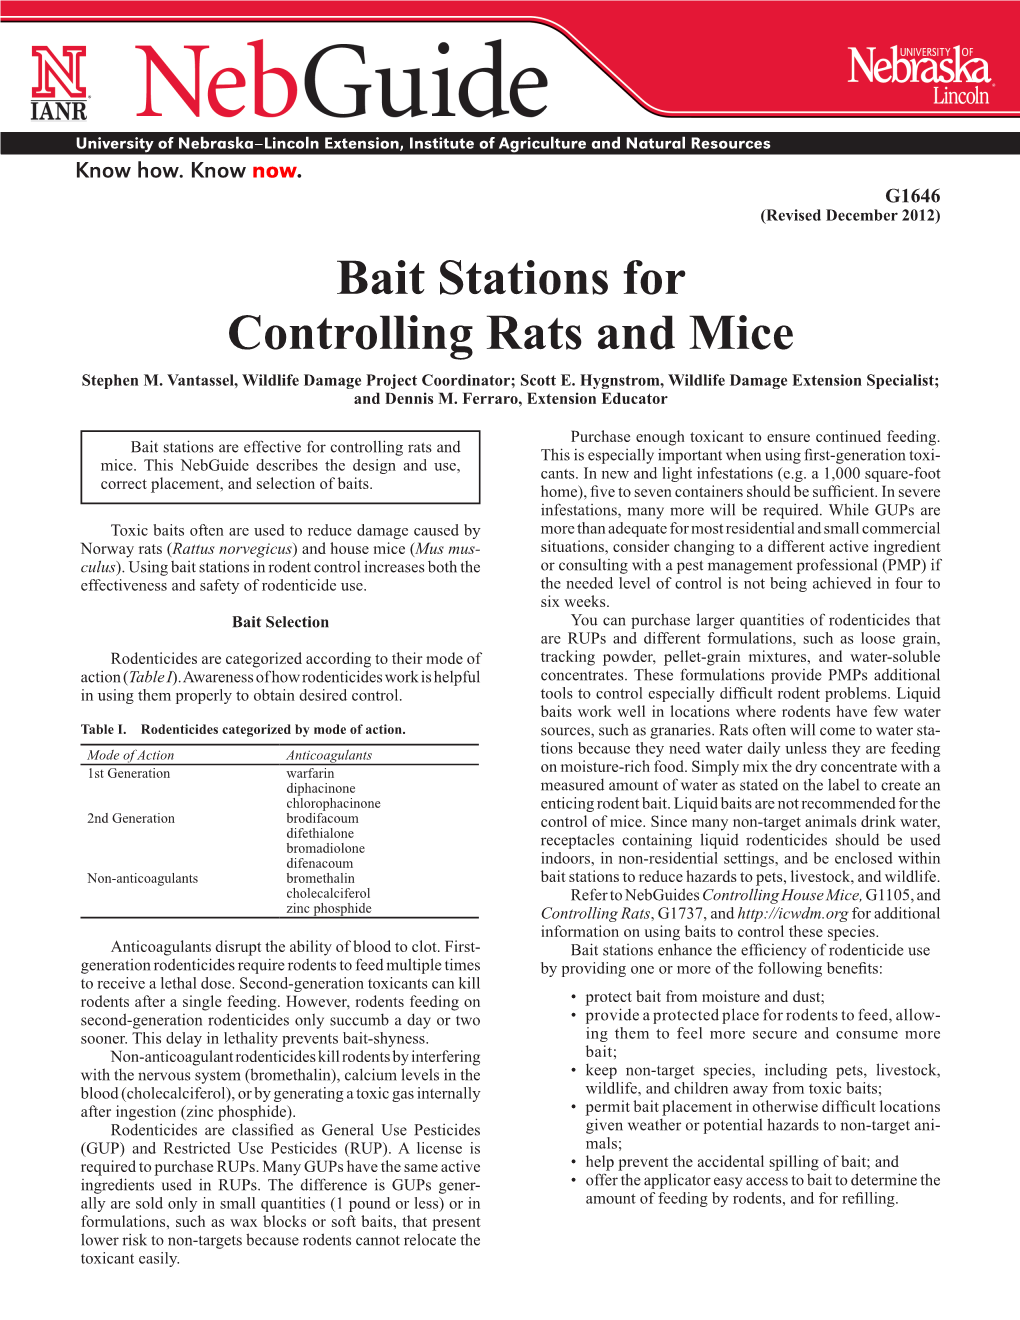 Bait Stations for Controlling Rats and Mice Stephen M